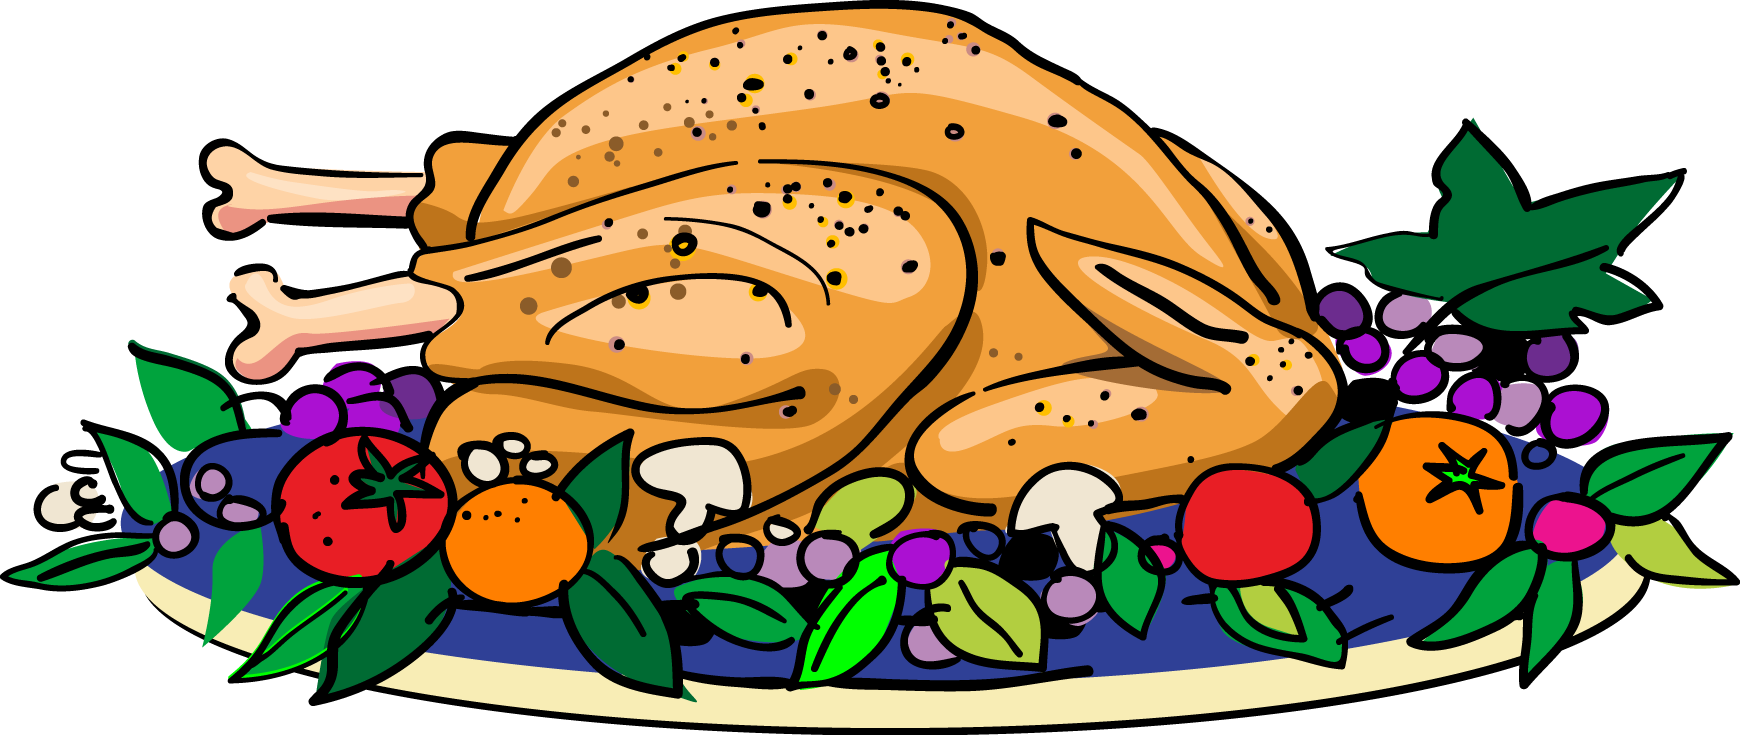 Picture Of Turkey Dinner Wallpapers